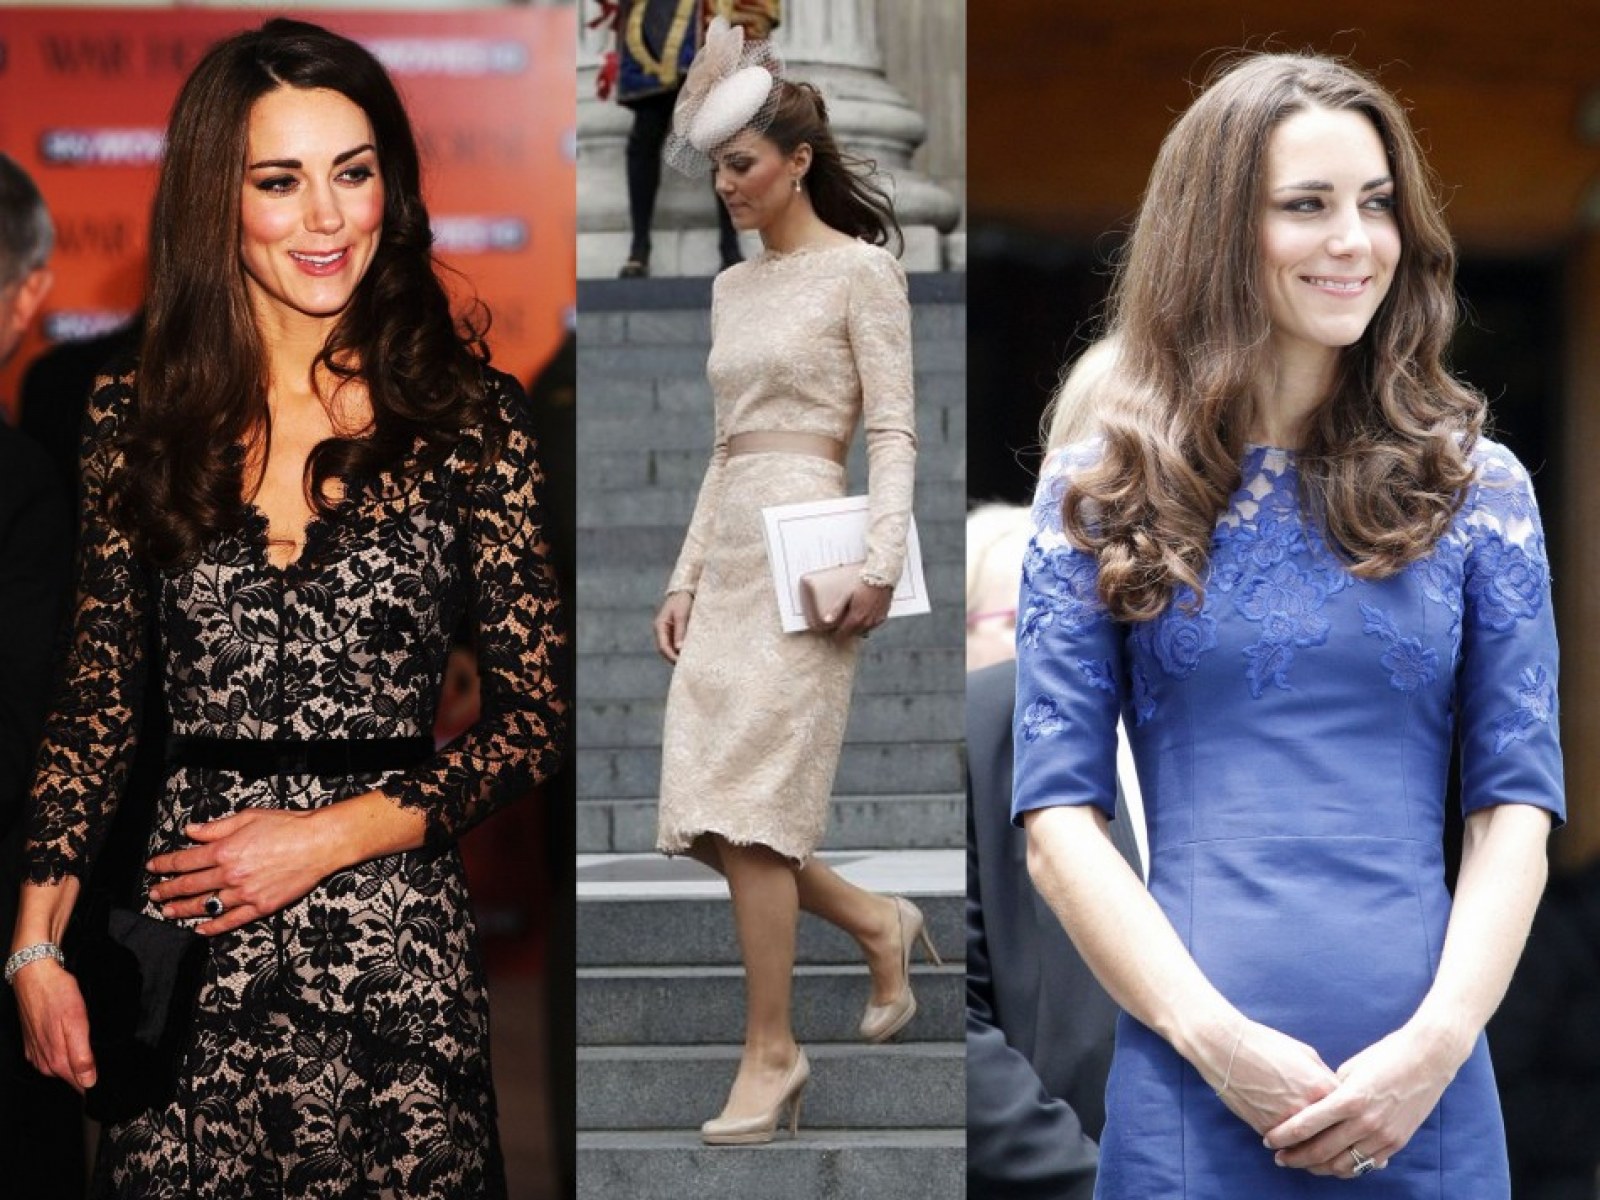 From Canada Tour to Diamond Jubilee: When Kate Middleton Looked Truly a  Royal in Lace Dresses [PHOTOS]